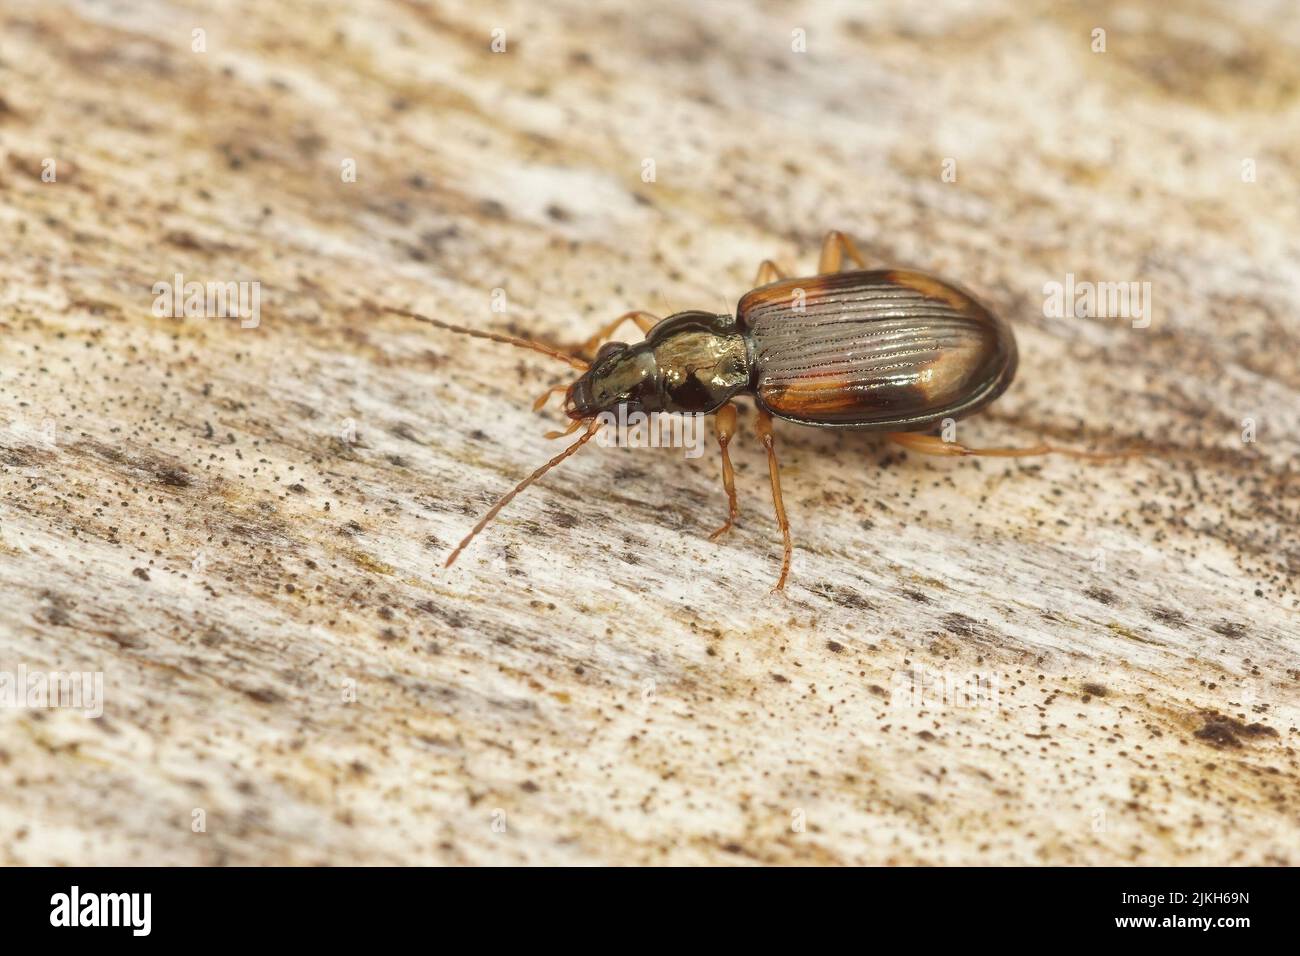 Closeup on a rather small ground beetle, Bembidion tetracolum , sitting on wood in the garden Stock Photo